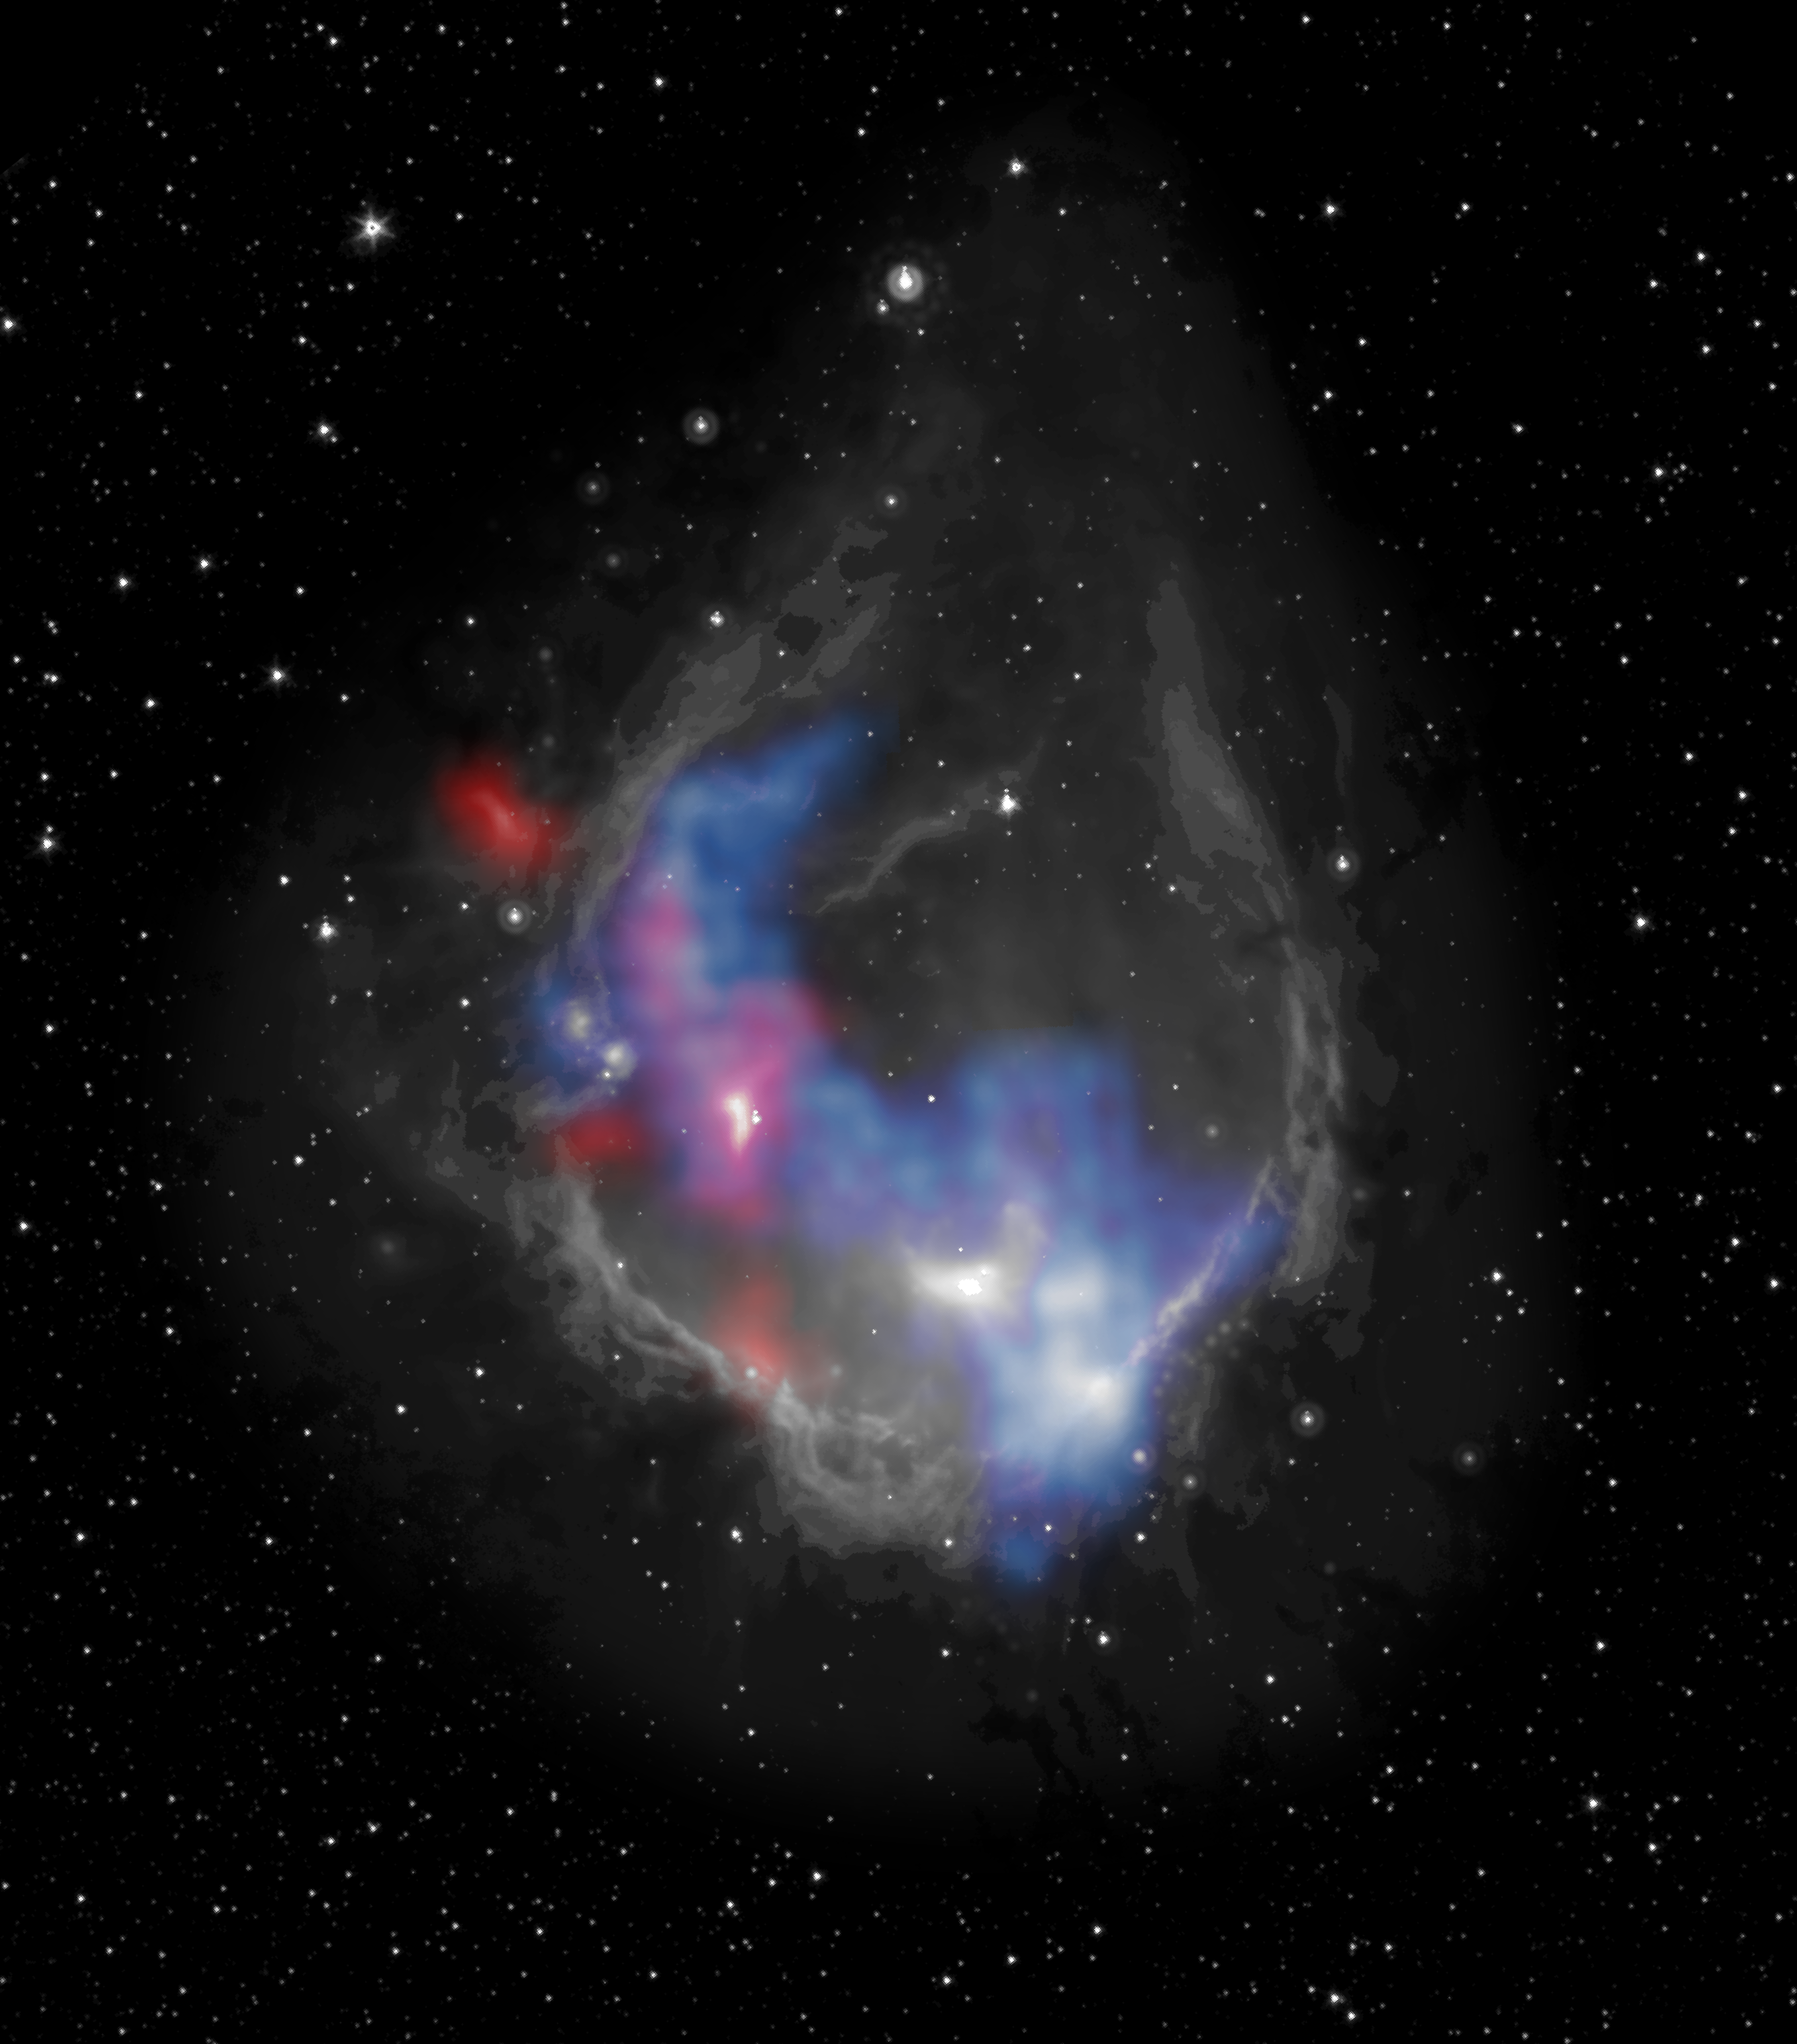 A faint ring of gray clouds breaks at the top, looking like horns extending upward. Inside the left side and lower part of the gray ring is a thick blue cloud. A ribbon of red overlaps part of the blue cloud on the left side, but also extends just outside the gray clouds. All of this is on a black background dotted with star light.